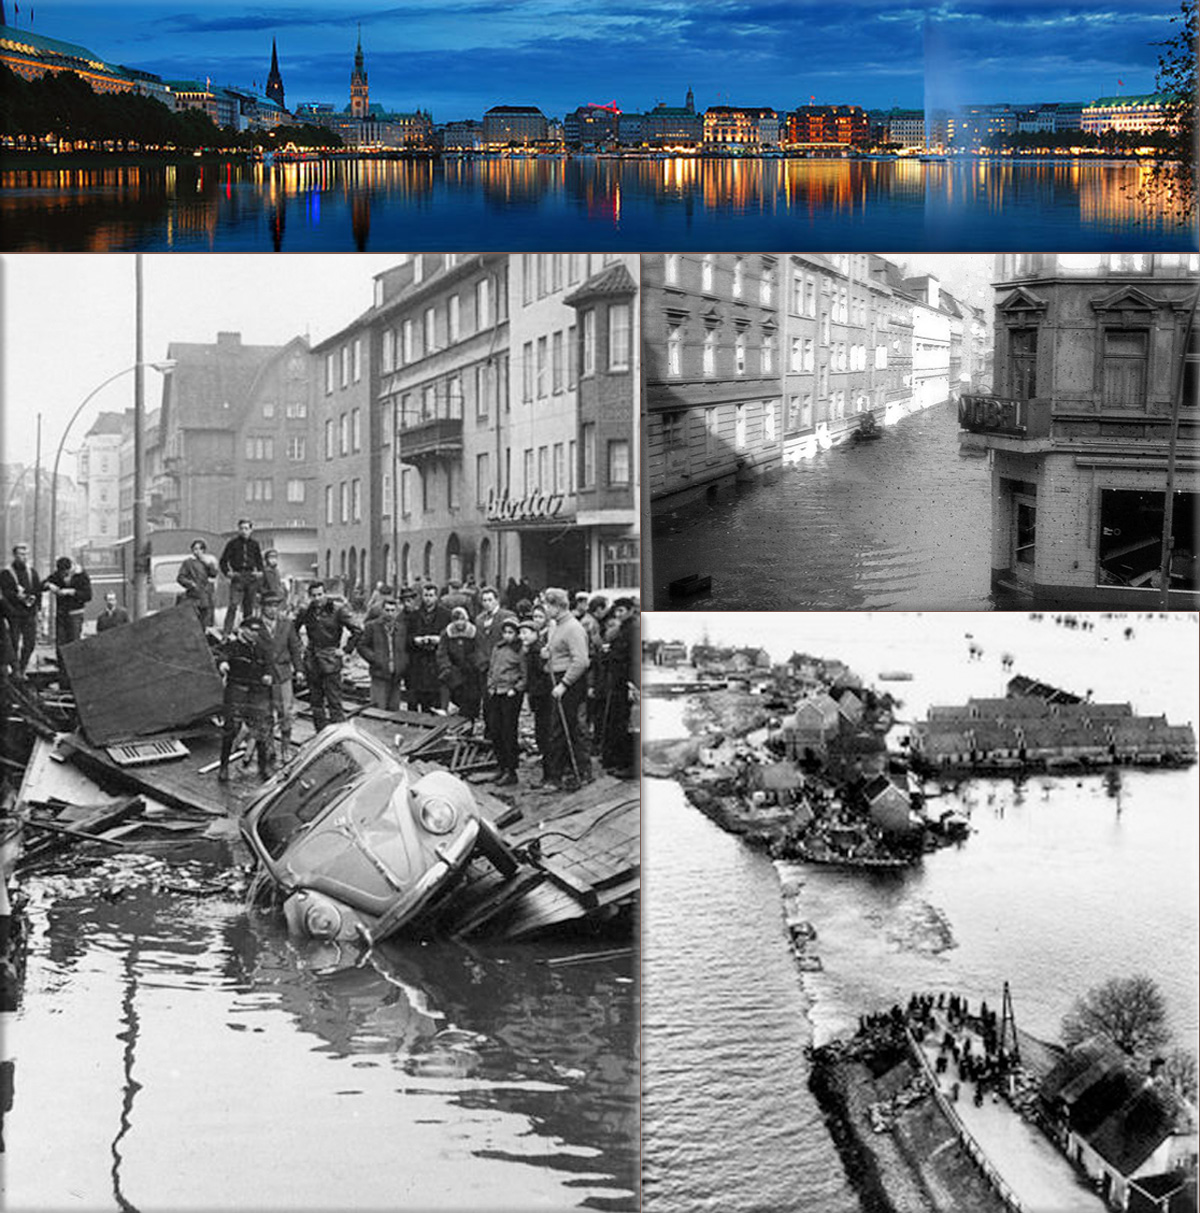 North Sea flood of 1962: was a natural disaster affecting mainly the coastal regions of Germany and in particular the city of Hamburg in the night from 16 February to 17 February 1962